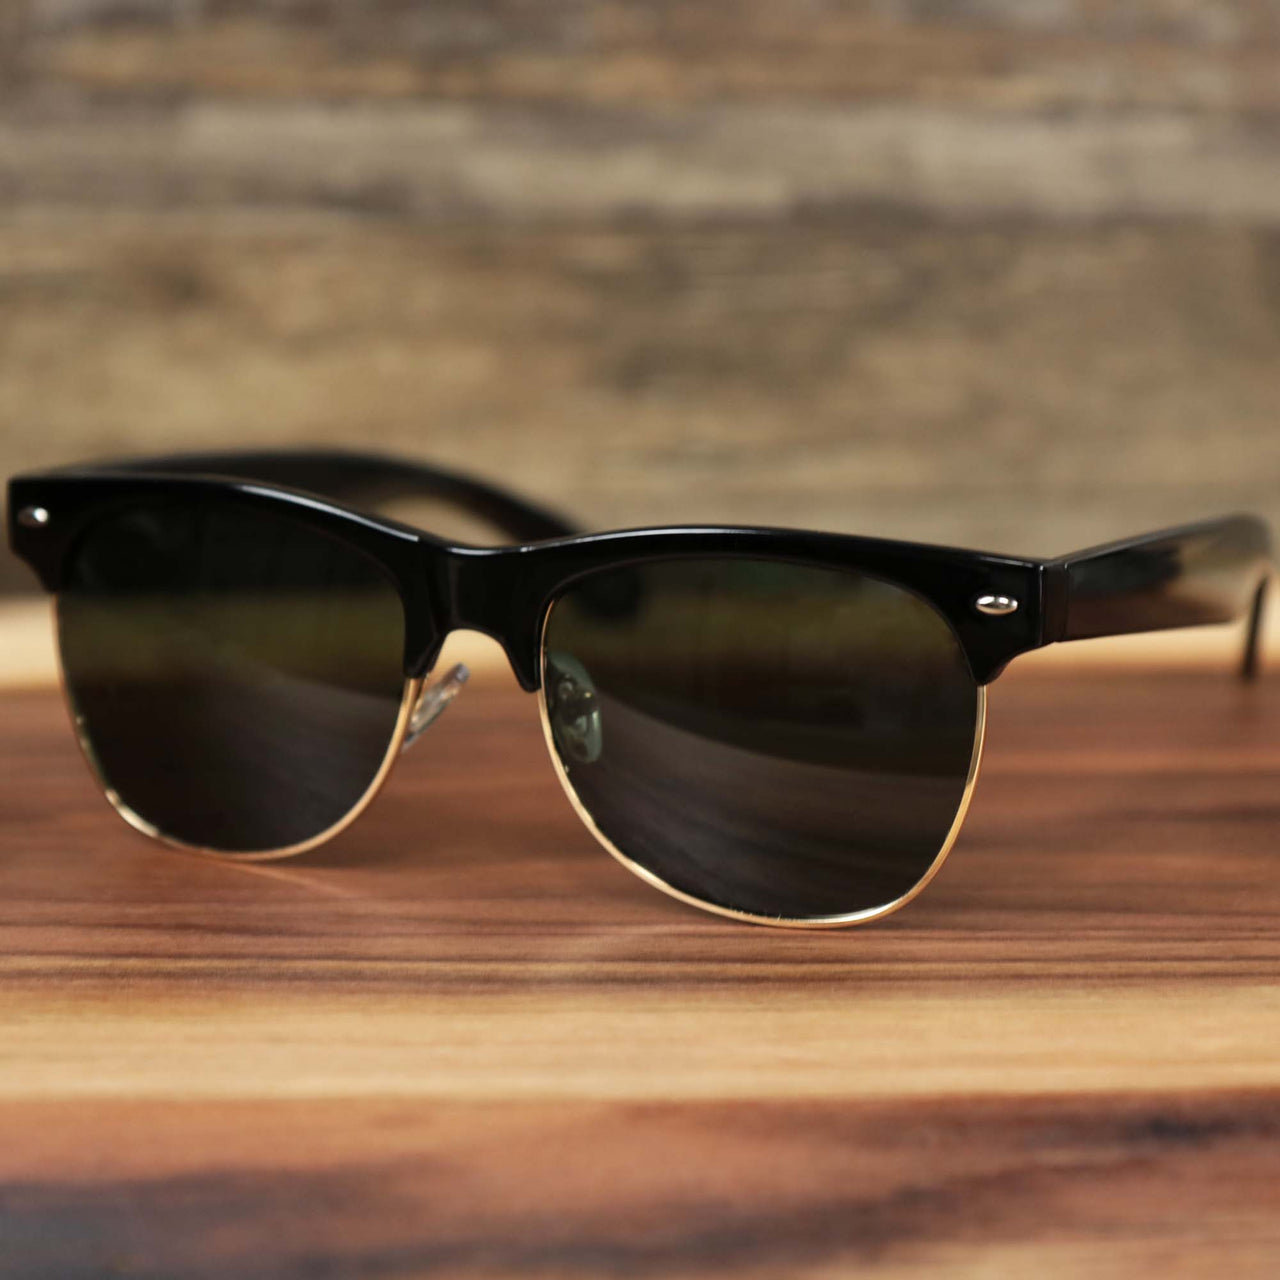 The Thick Top and Metal Bottom Frame Black Gradient Lens Sunglasses with Black Frame